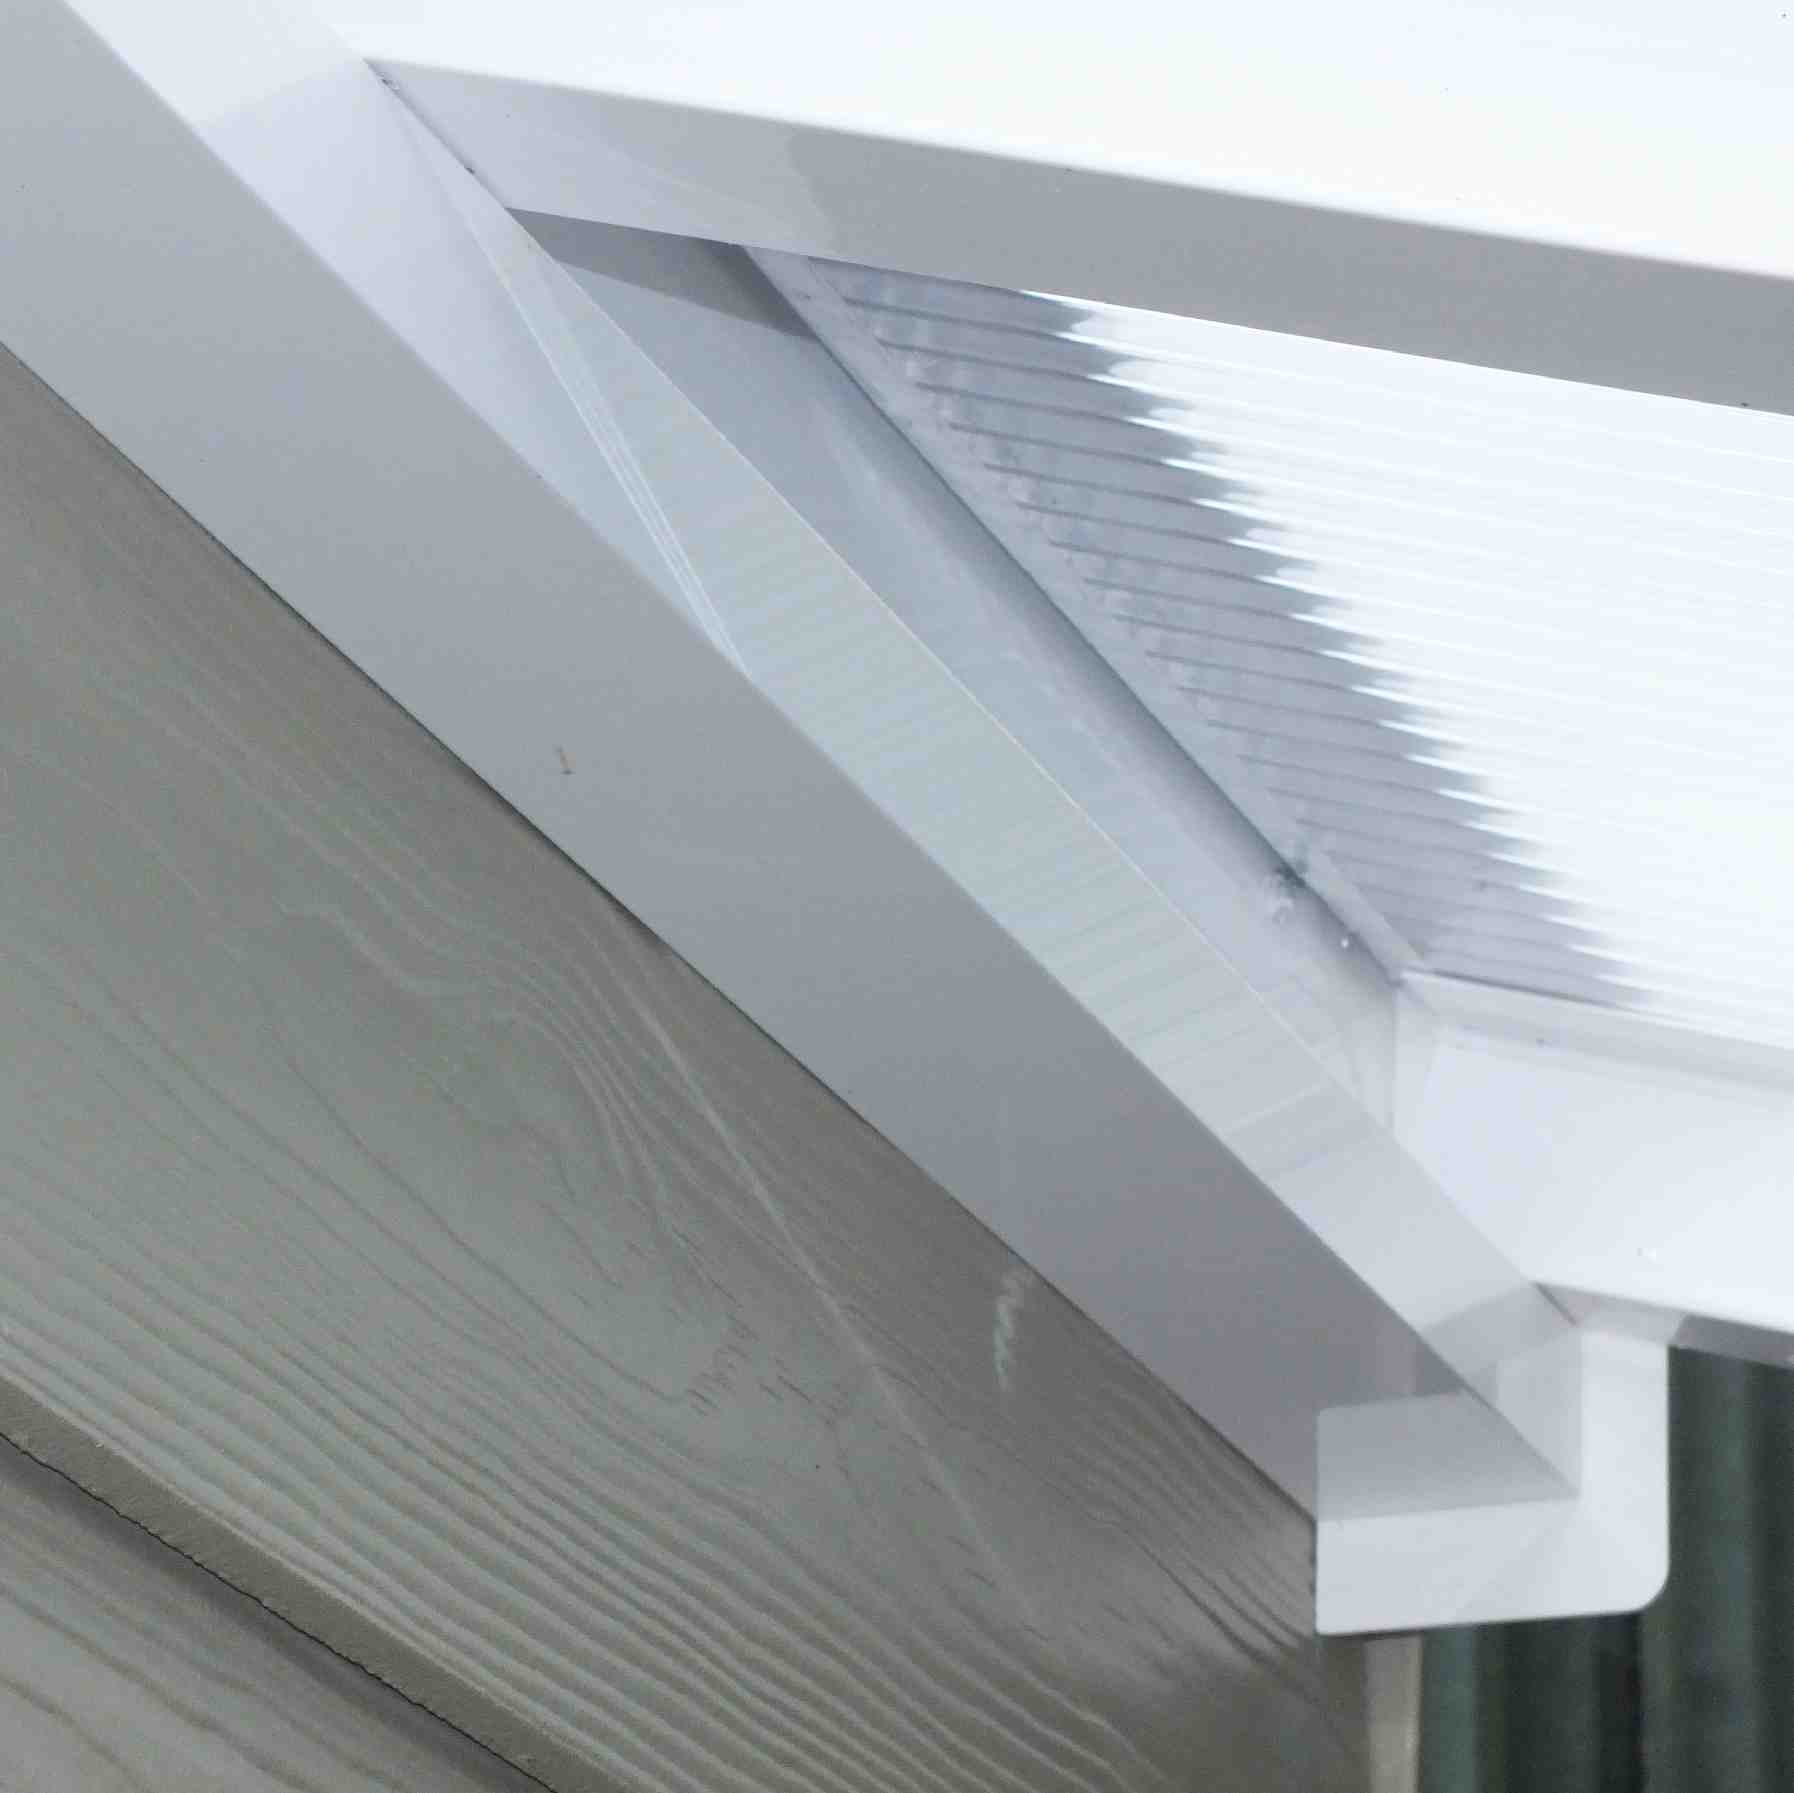 Great deals on Omega Verandah White with 16mm Polycarbonate Glazing - 12.0m (W) x 4.0m (P), (5) Supporting Posts